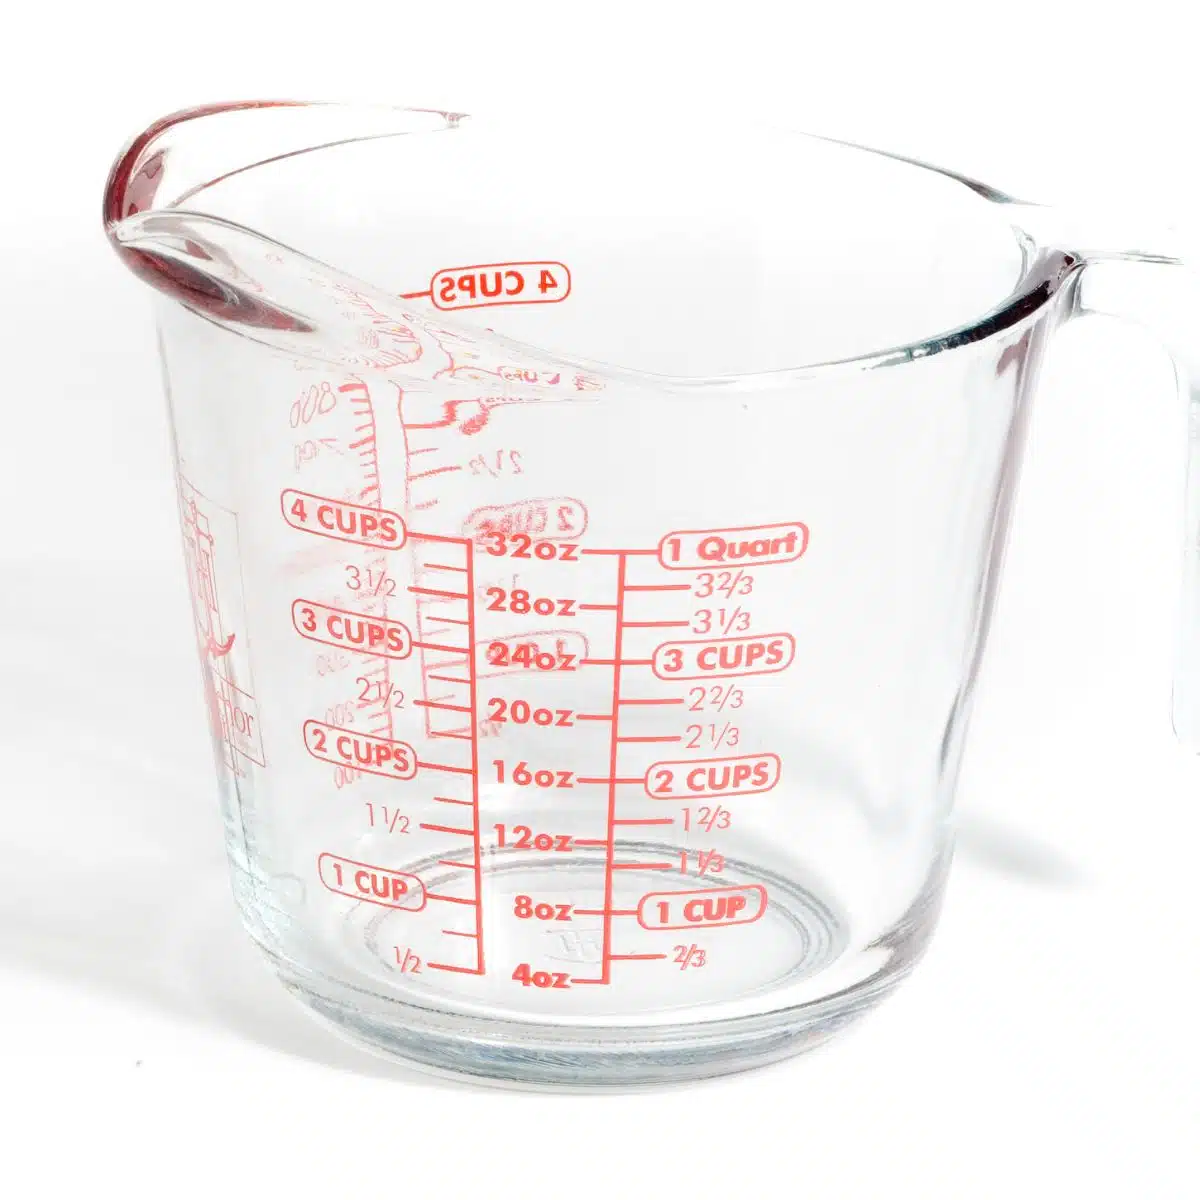 Square image showing a measuring cup.